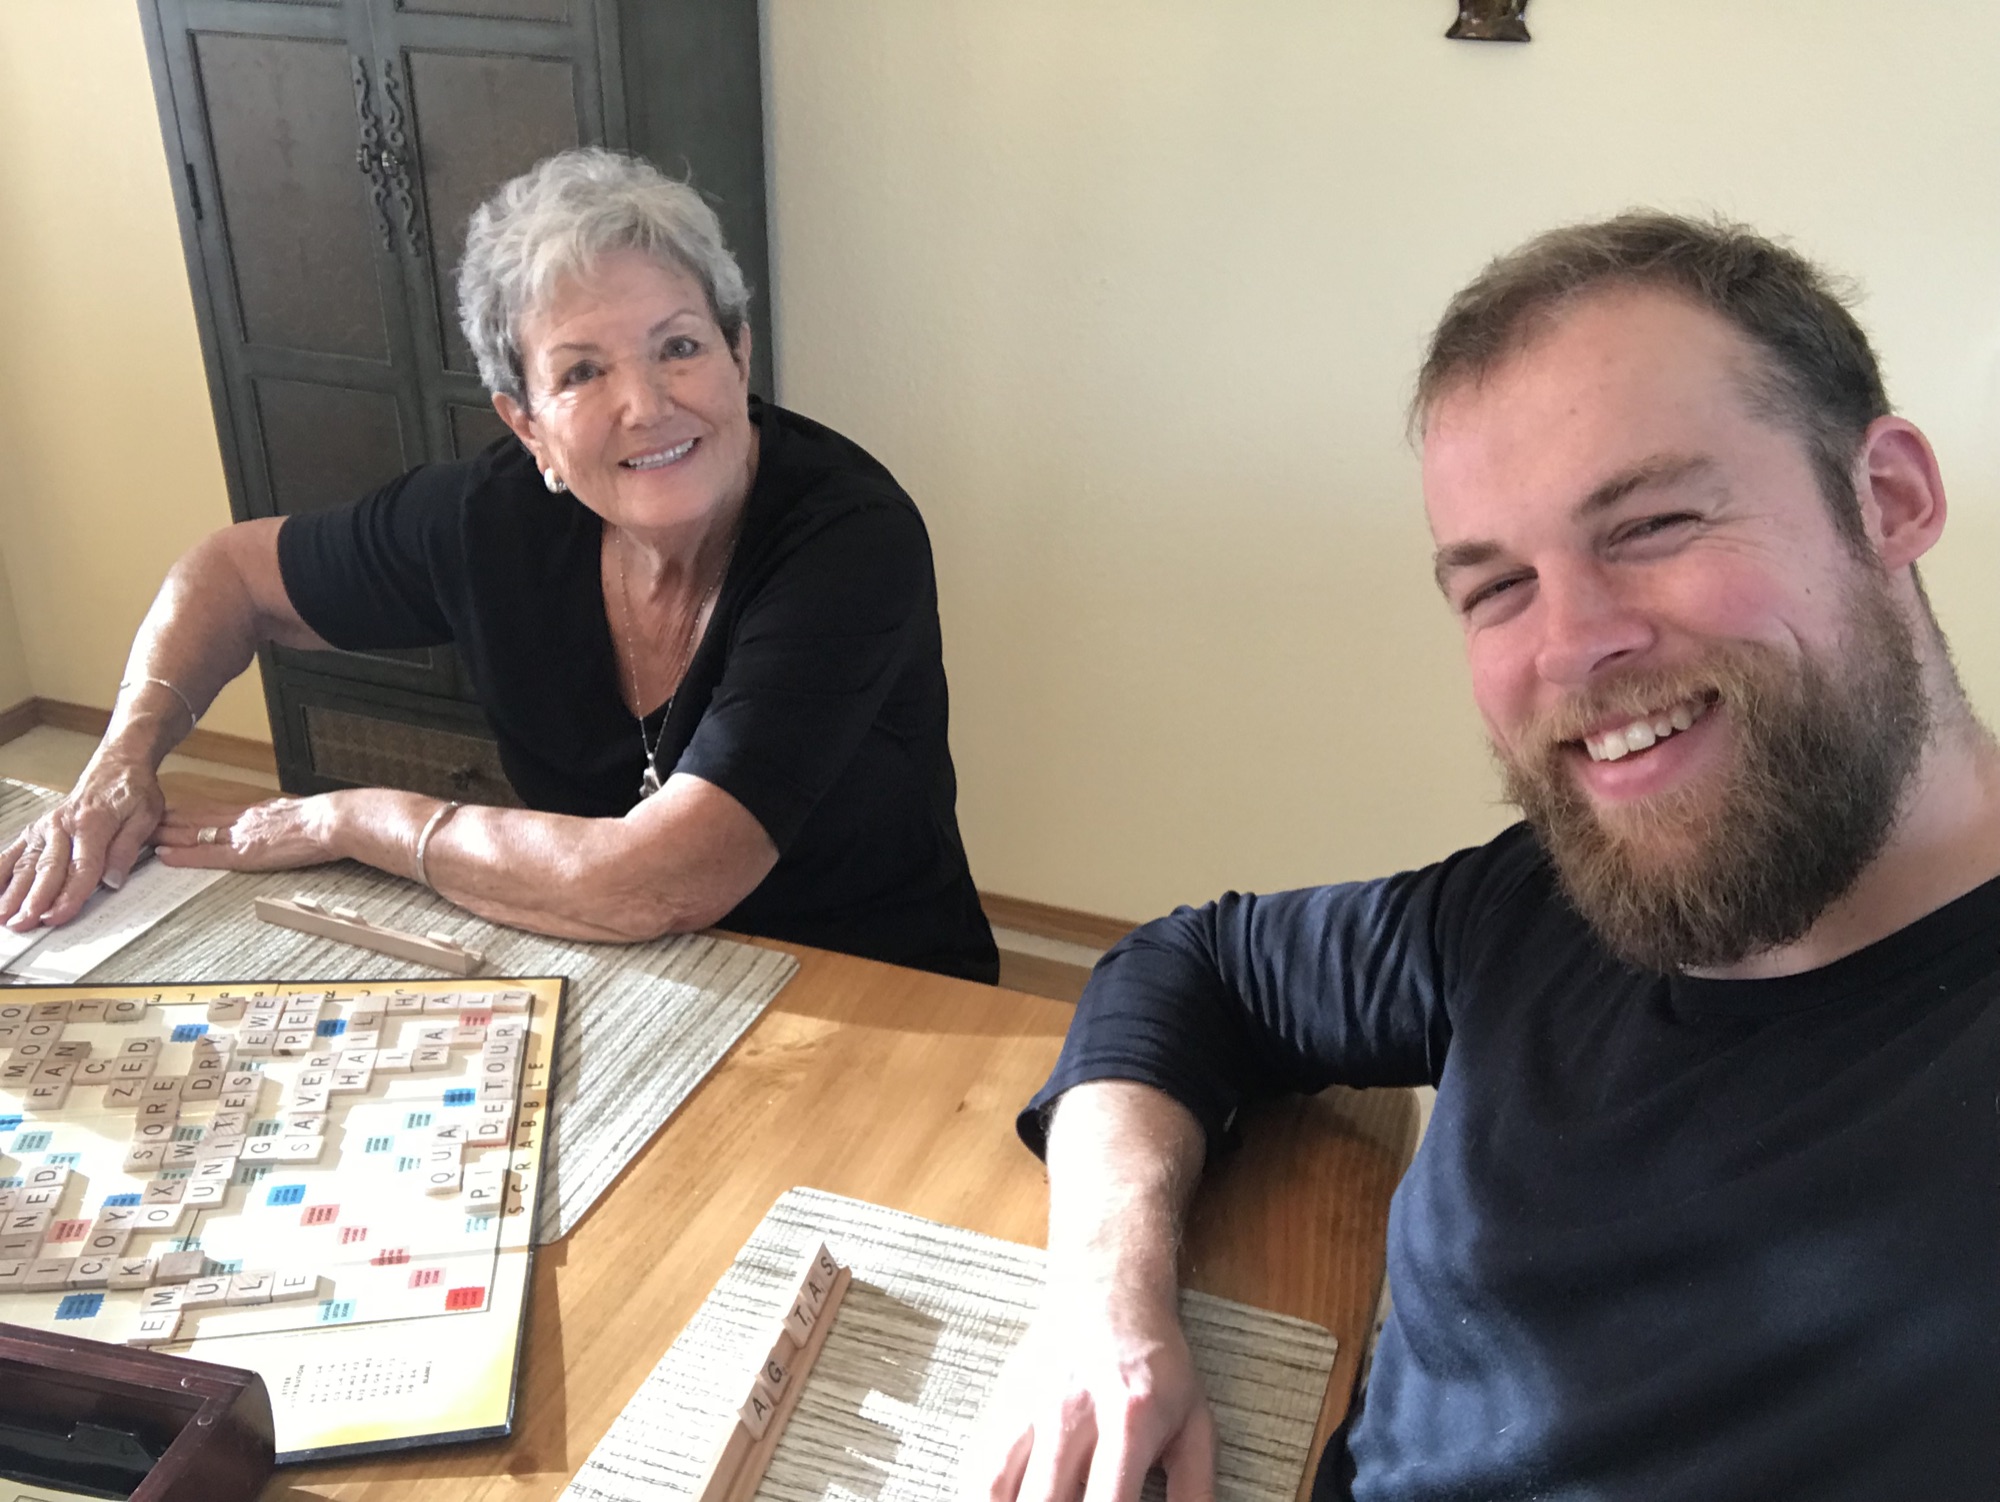 Playing Scrabble with my grandma as we always do